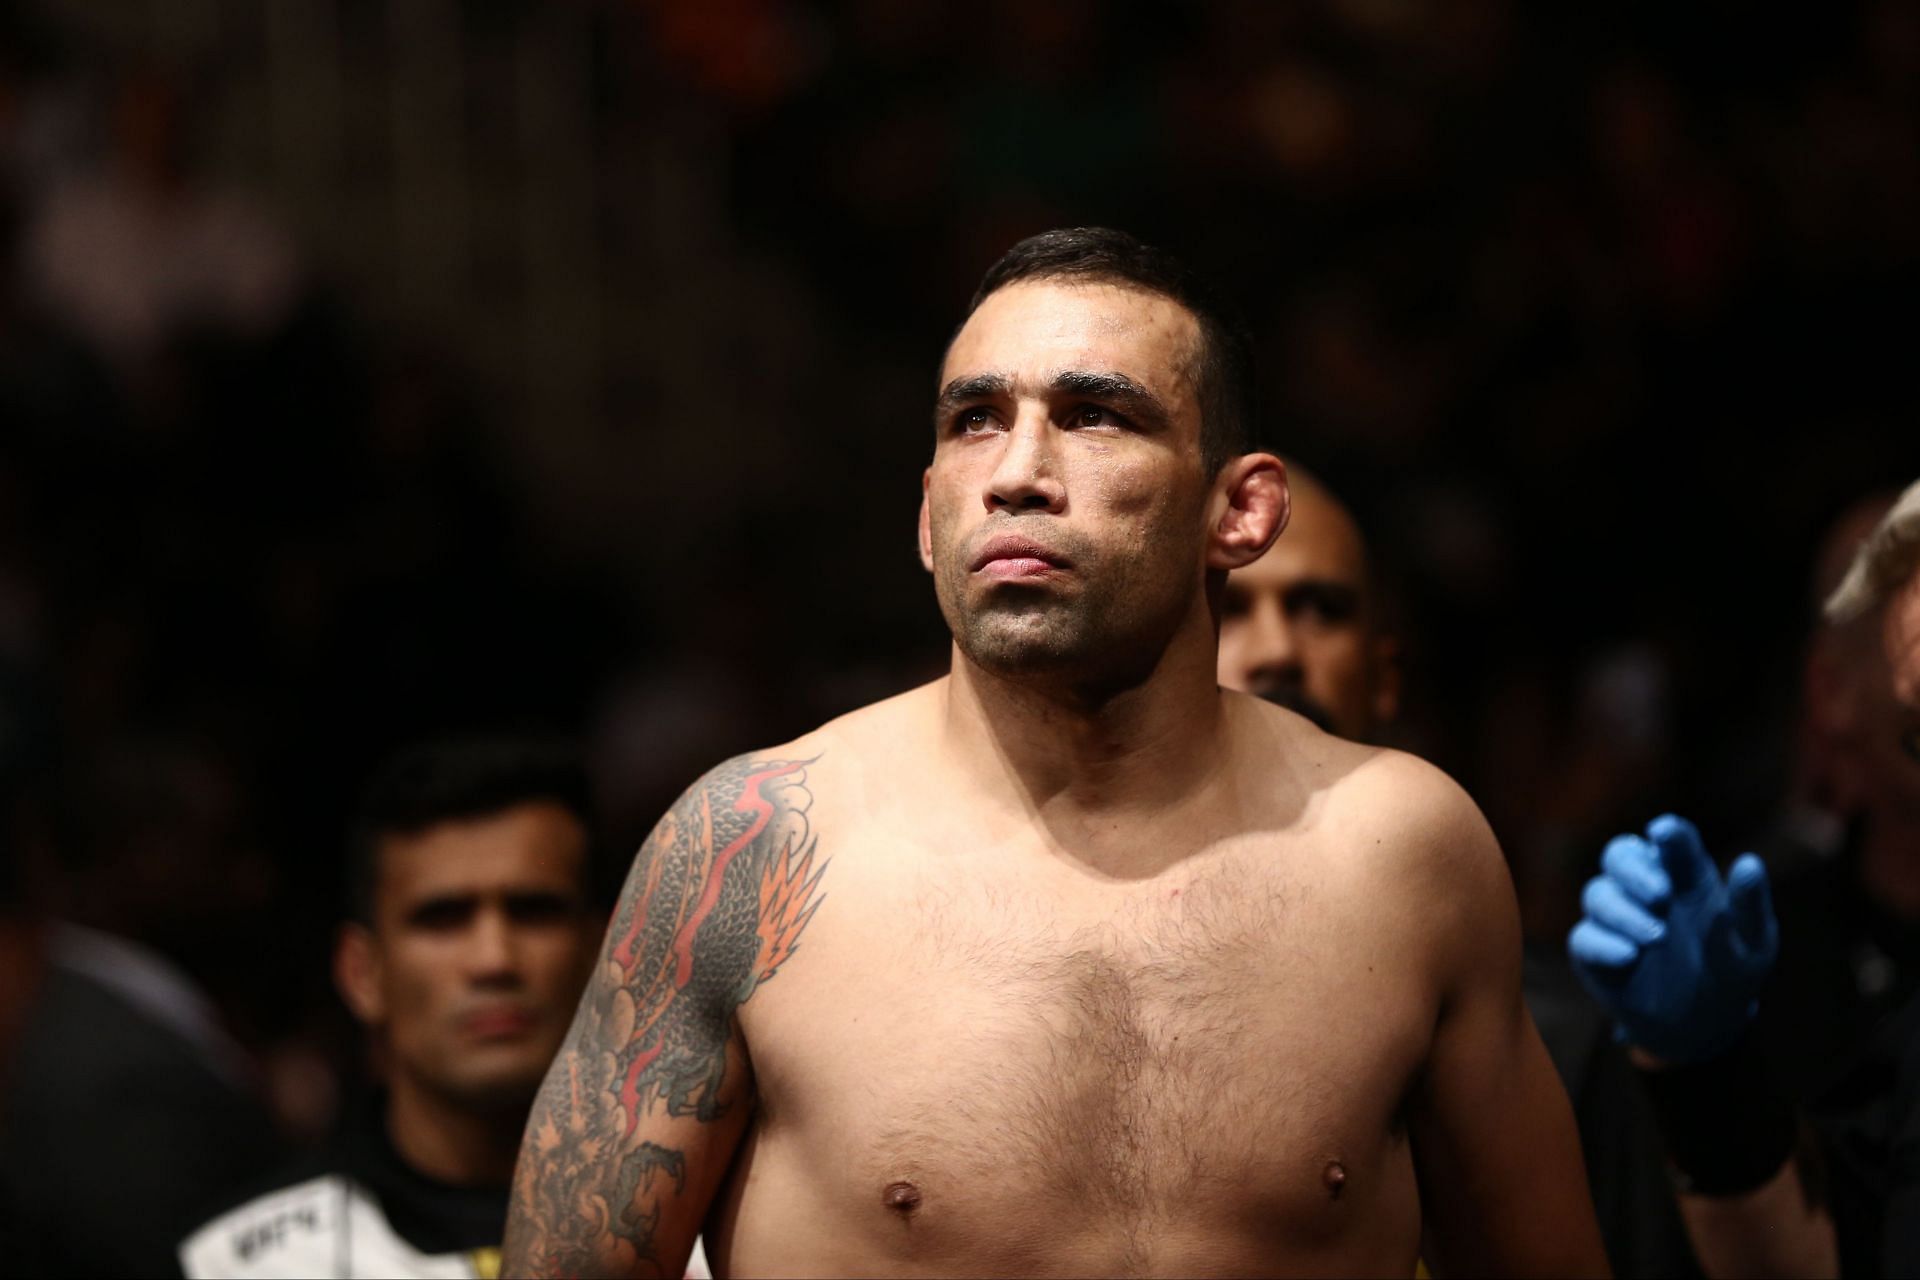 Nobody expected Fabricio Werdum to test positive for steroids after he turned 40